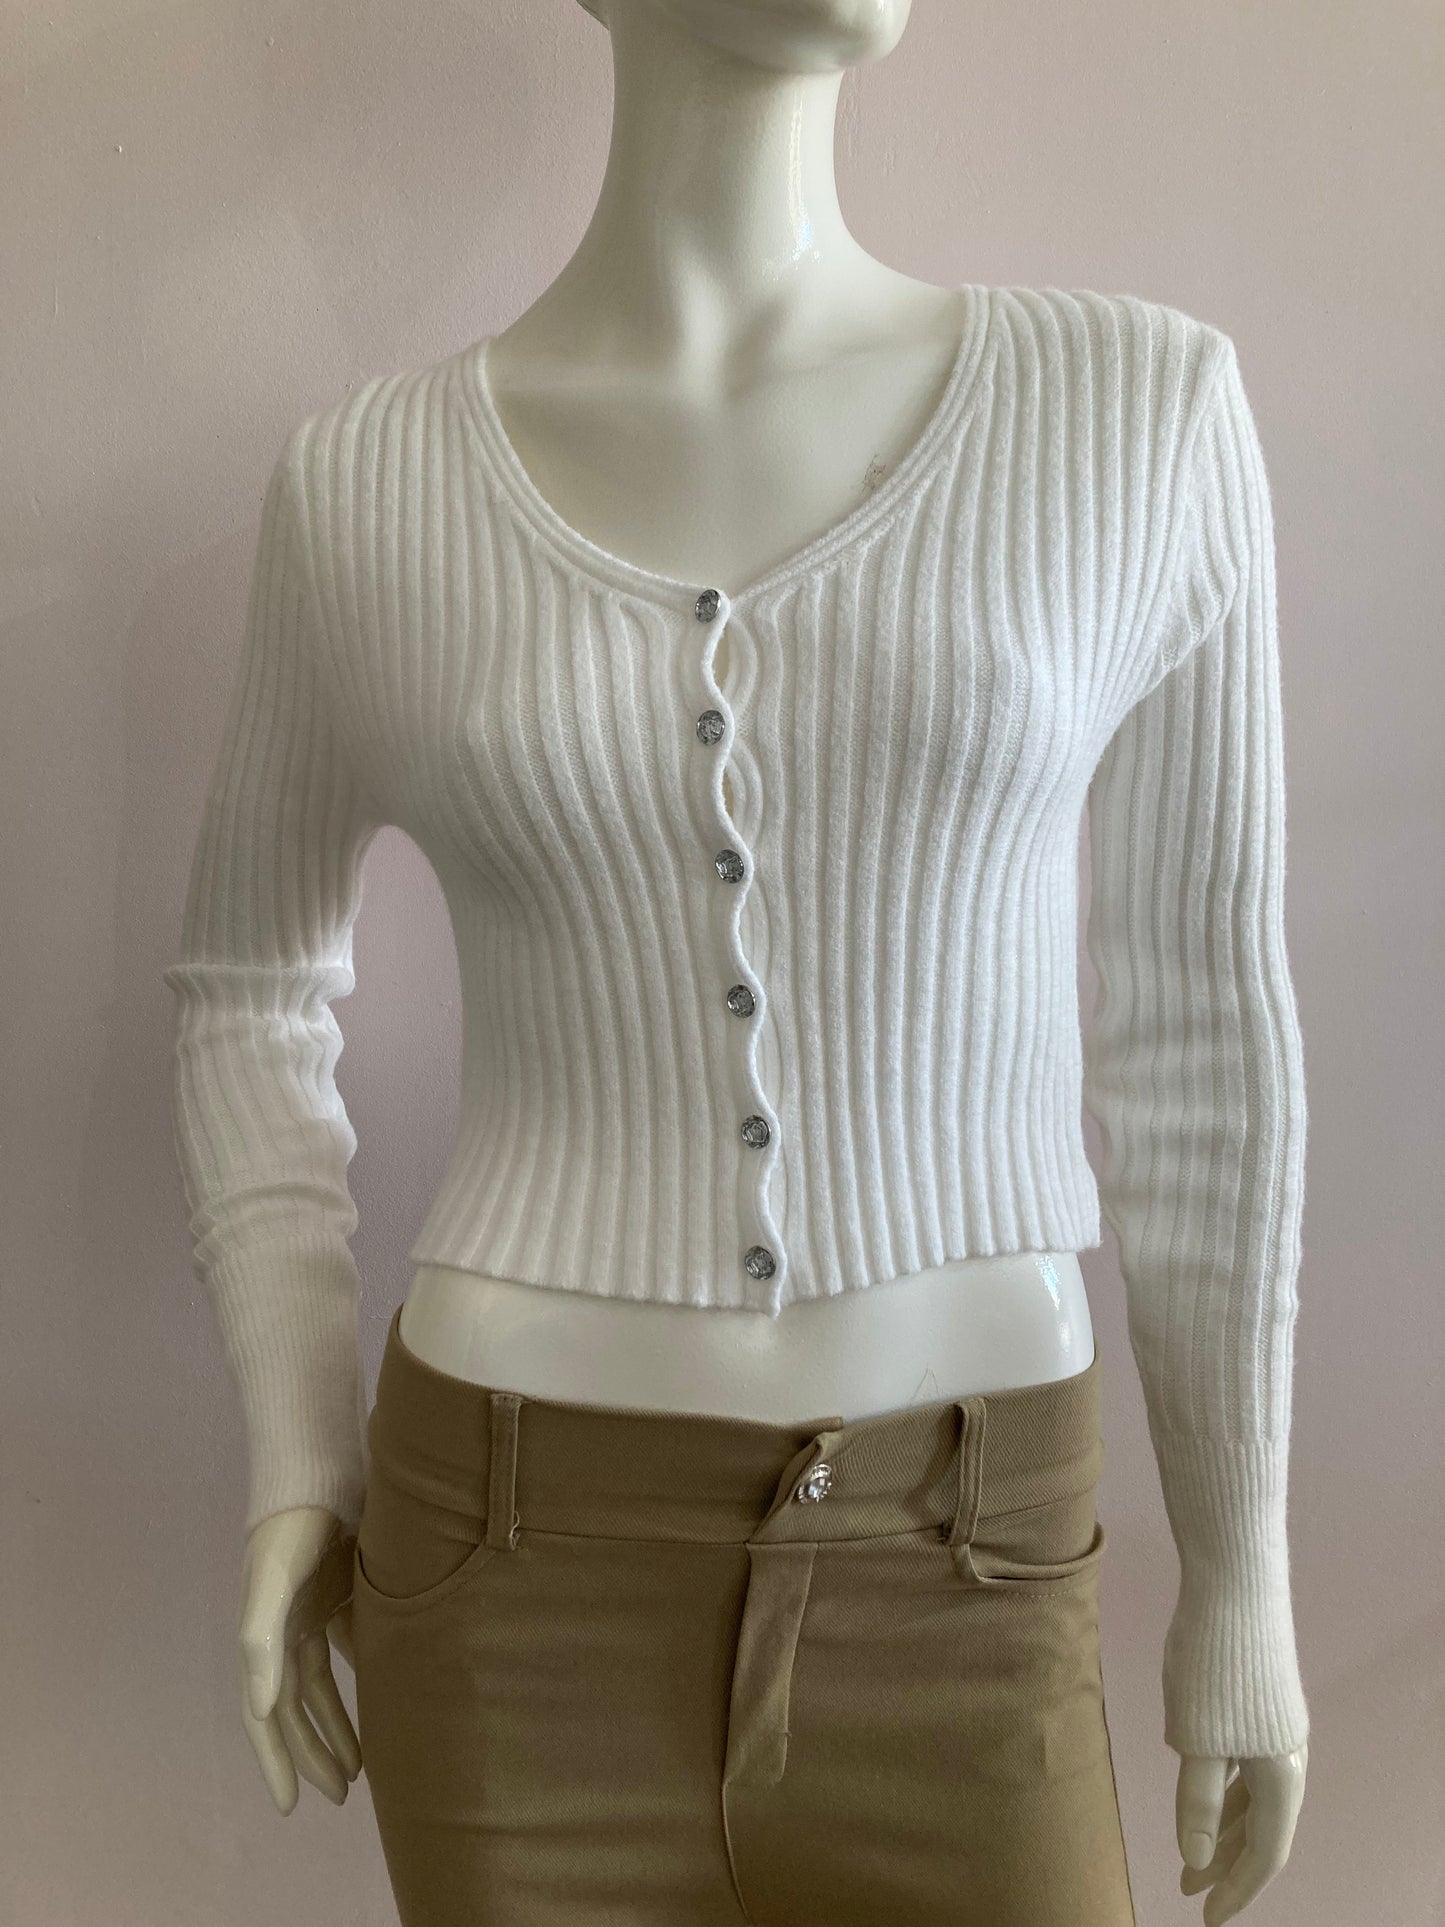 Nice short ribbed white cardigan with shiny buttons